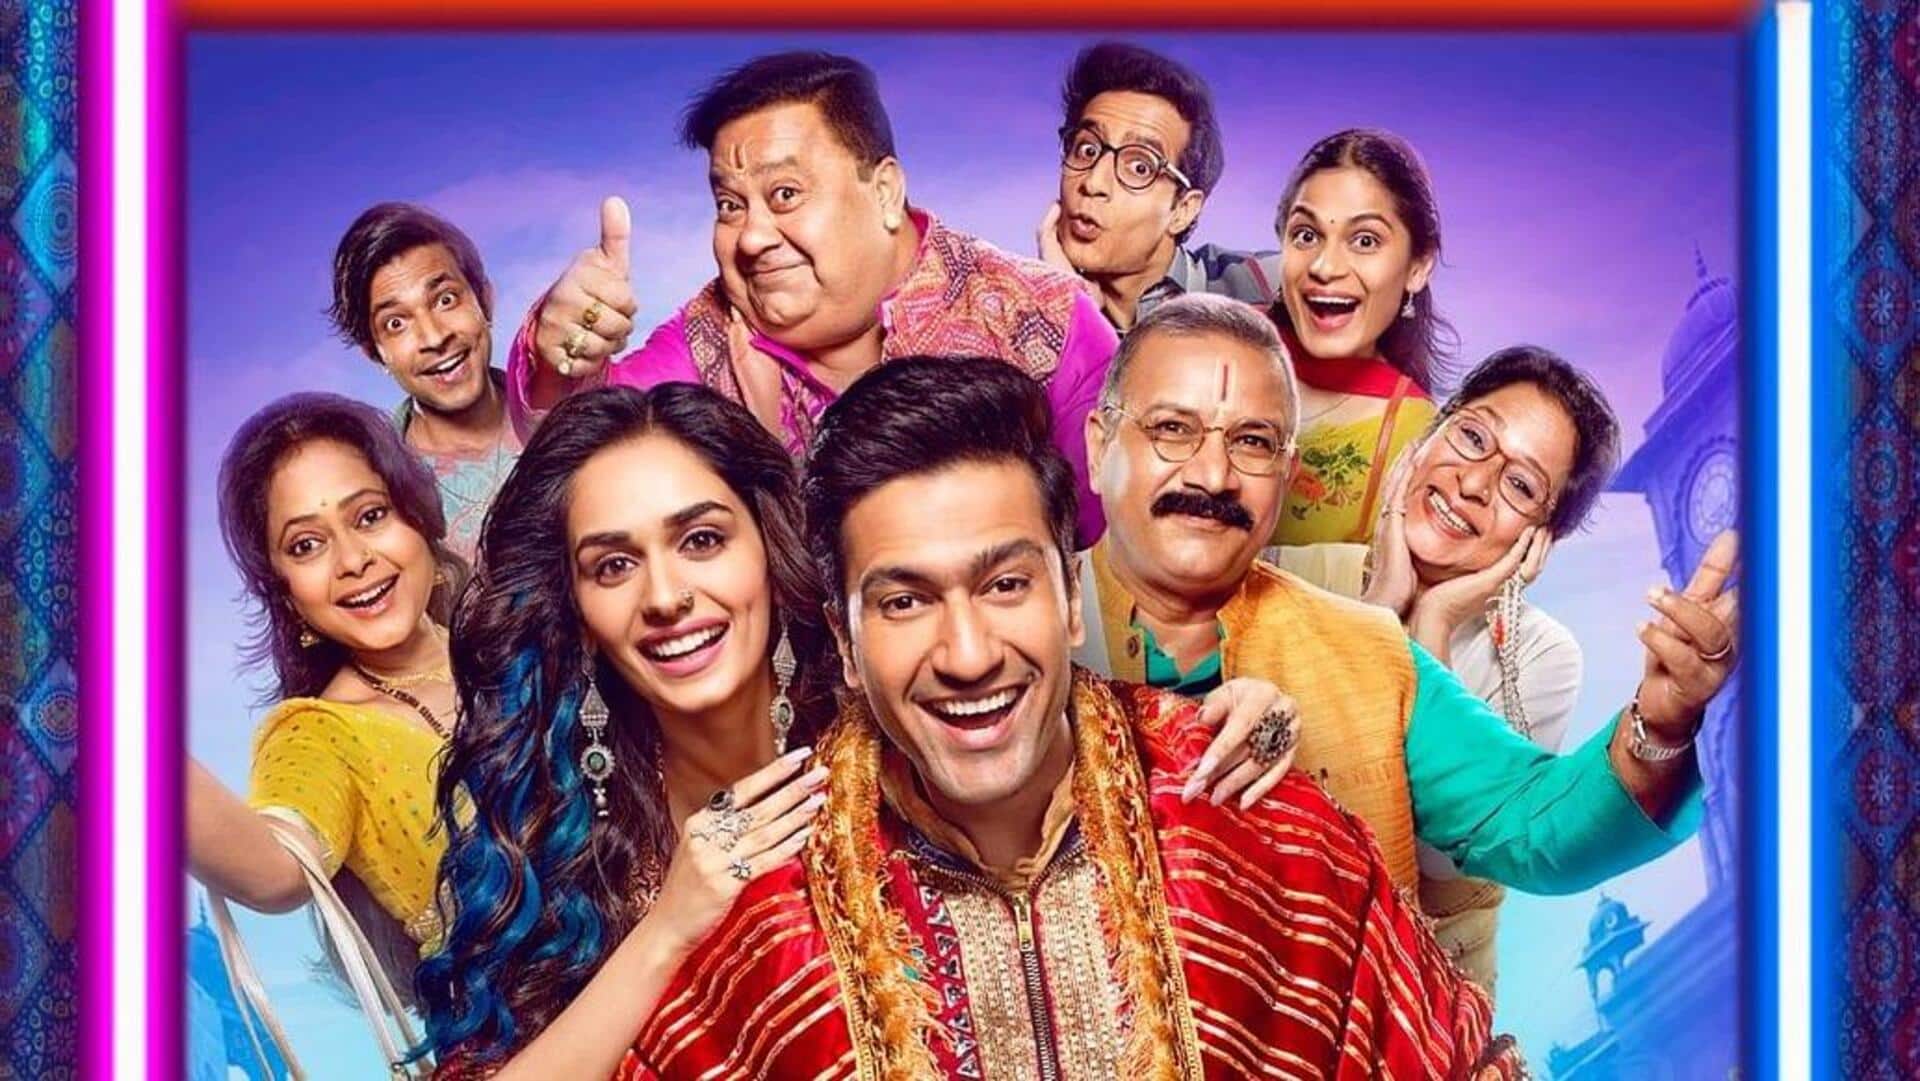 'The Great Indian Family' trailer breakdown: Family comedy gets quirky 